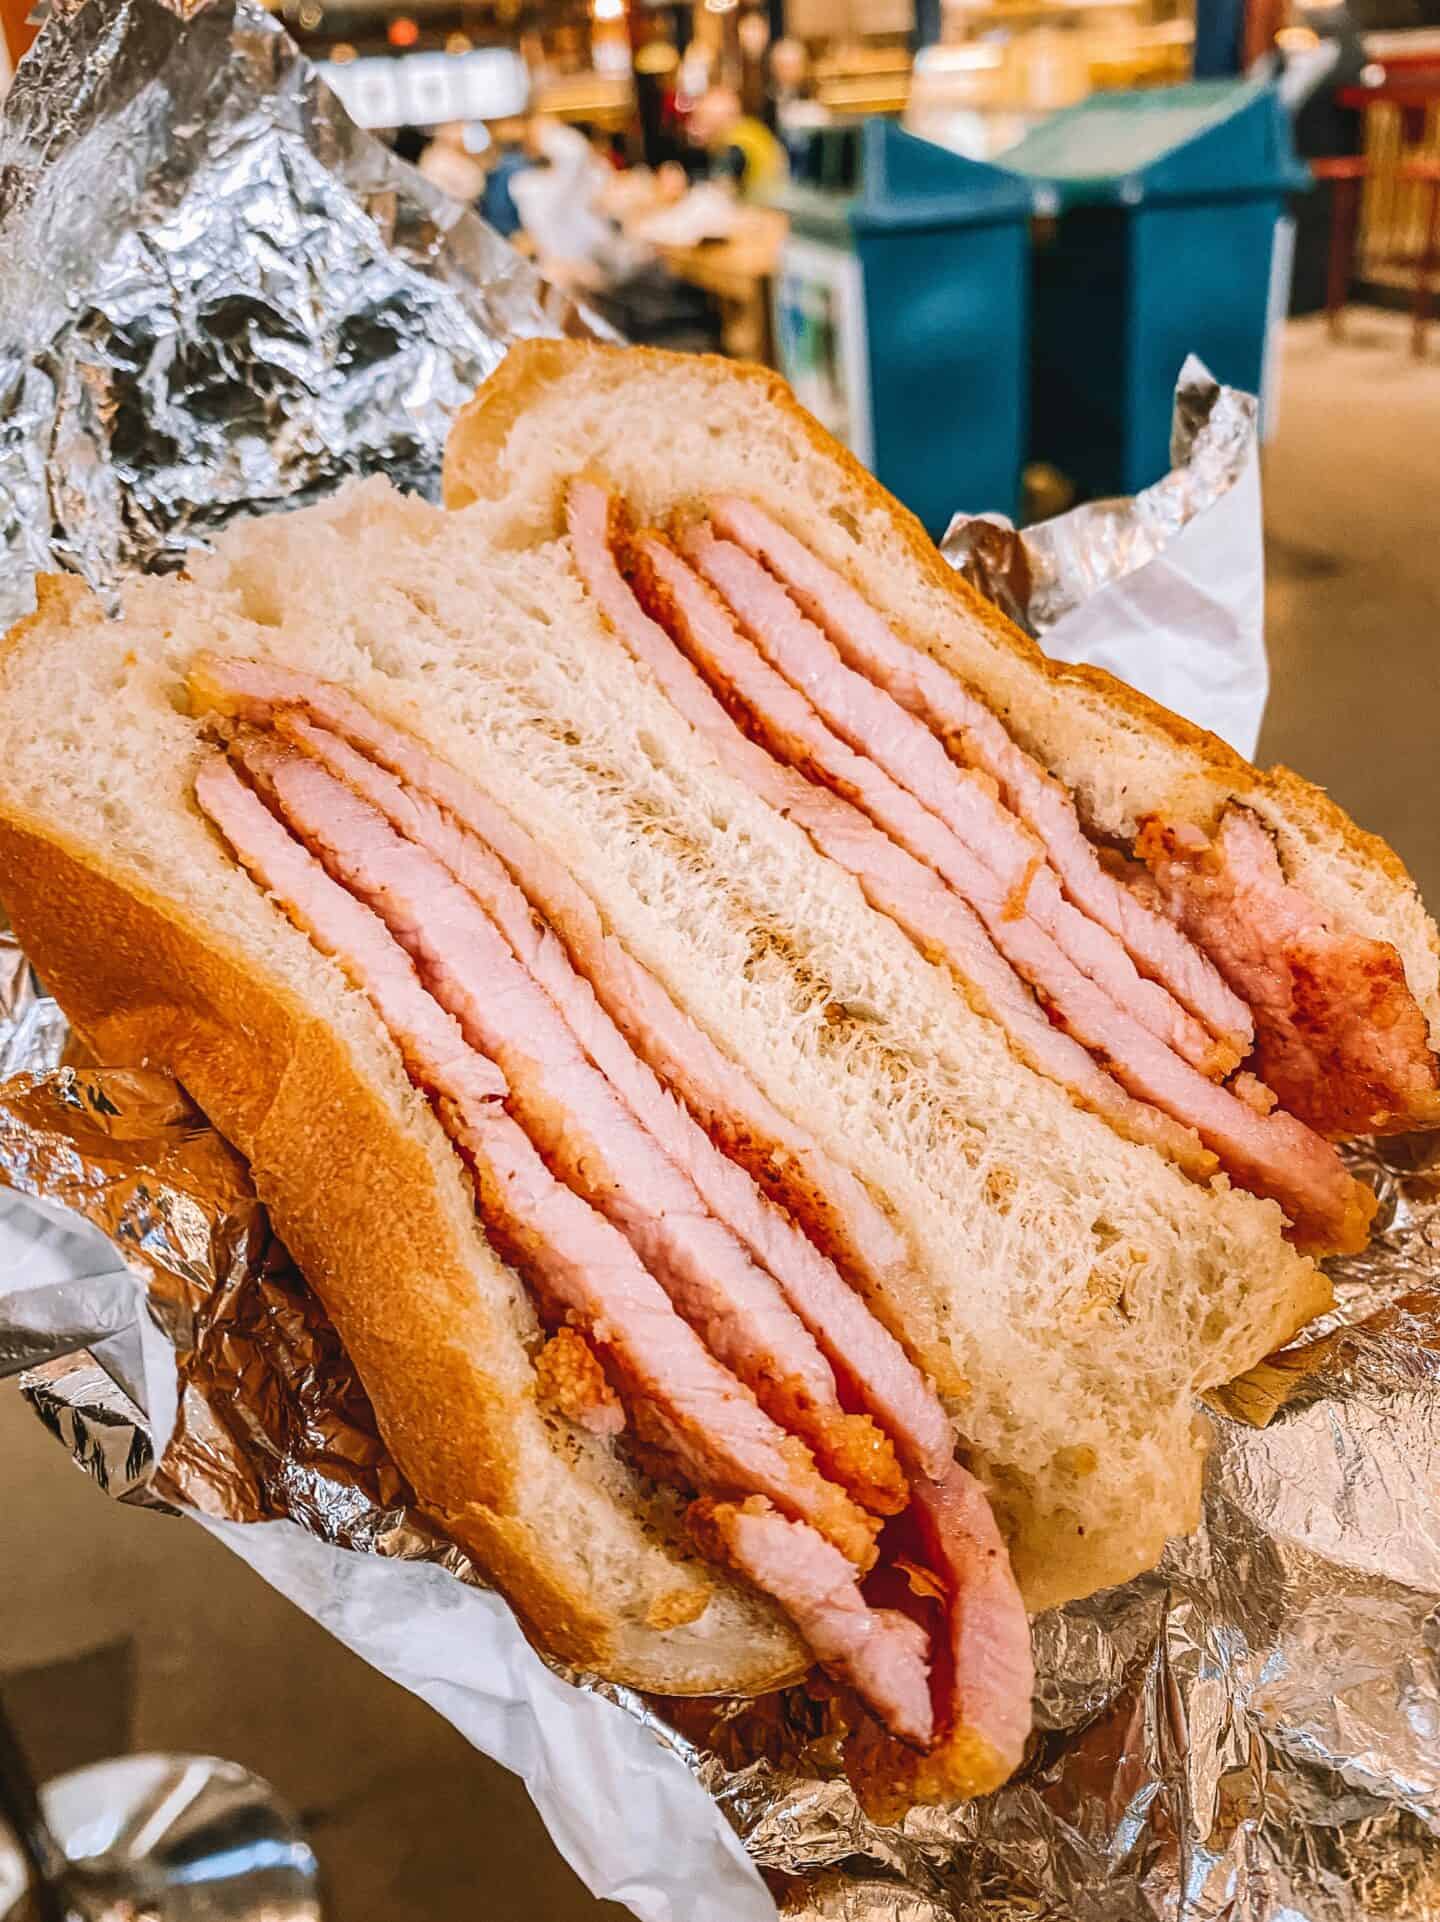 Trying peameal bacon sandwiches at the St. Lawrence Market is a must-do during your 4 day Toronto itinerary